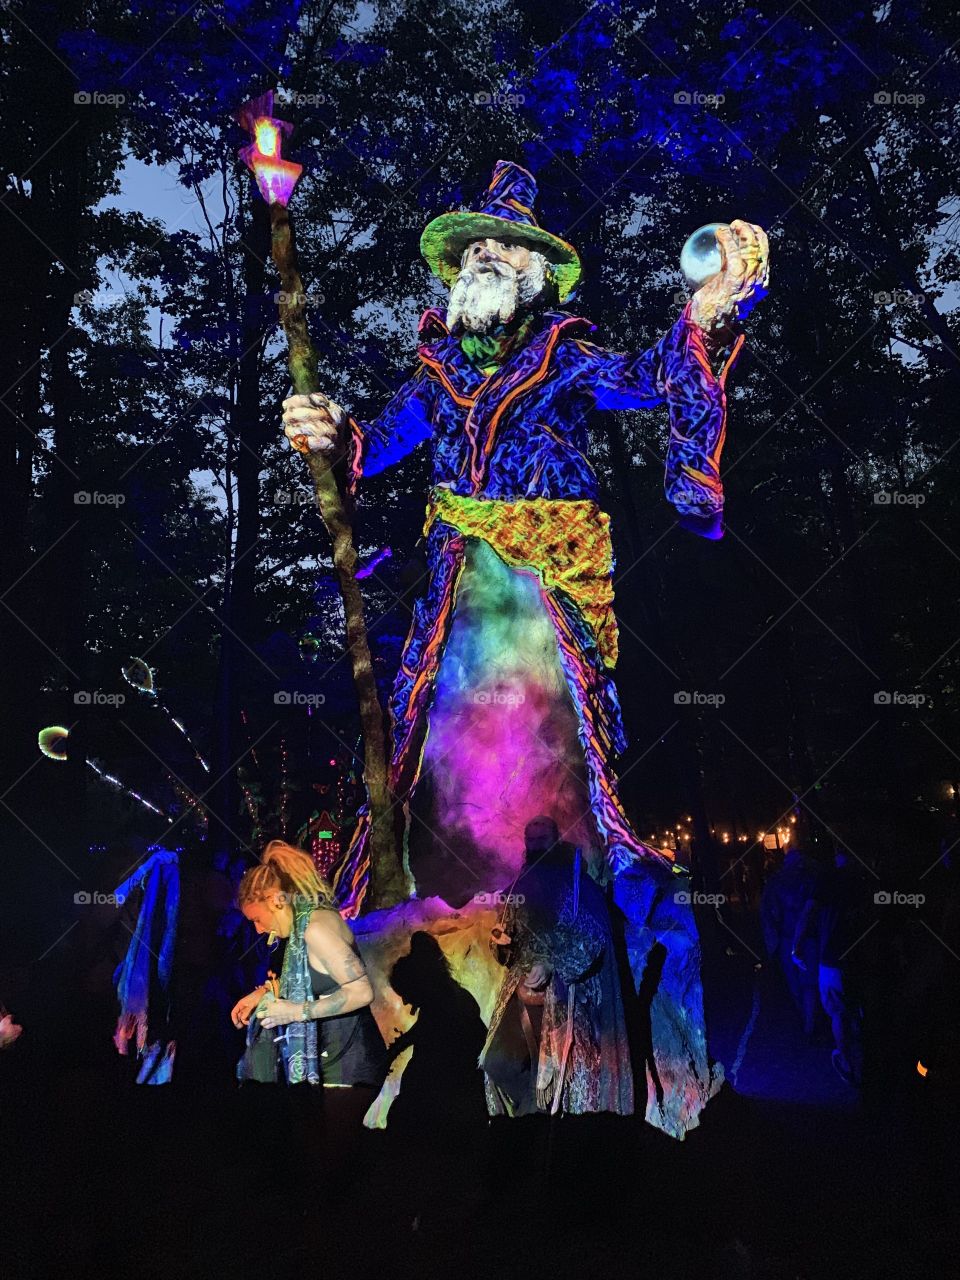 Wizard Art Installation Rothbury Michigan, Electric Forest Festival, Neon Lights, Rainbow Foresters, Magic Sorcery 